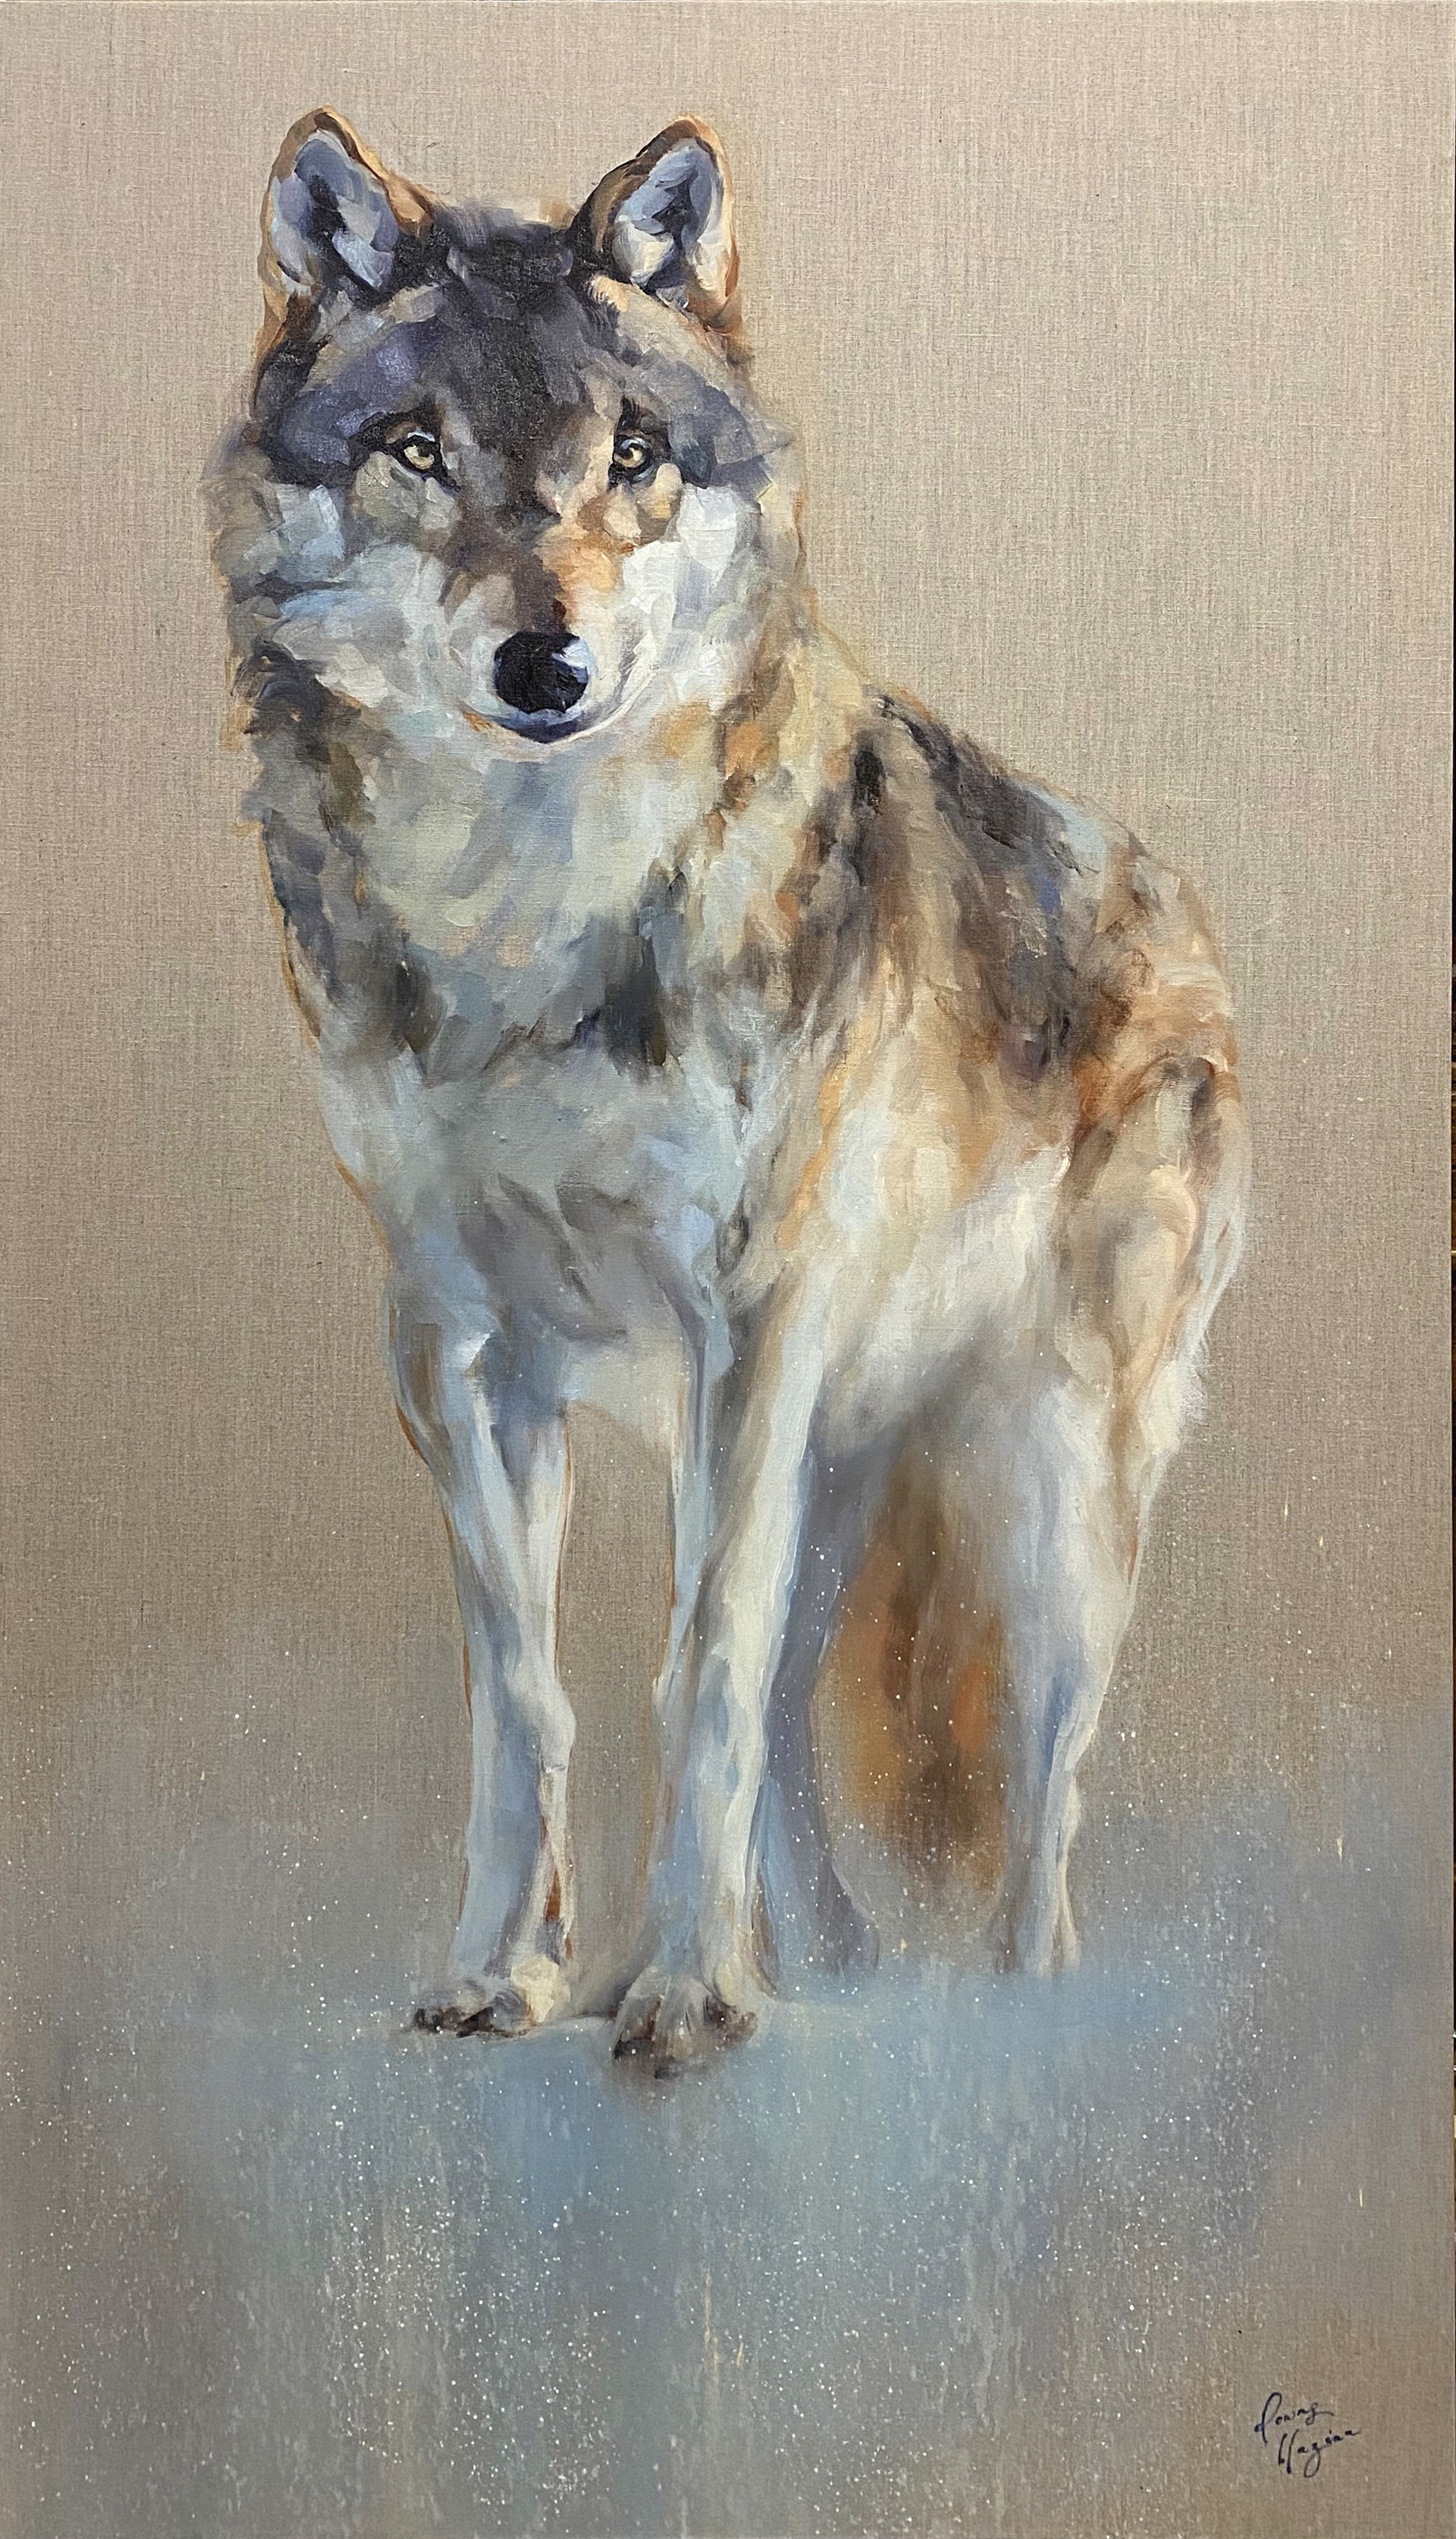 An Original Oil Painting Of A Standing Wolf In A Contemporary Style With Abstract Ground Fading Into Raw Linen, By Amber Blazina